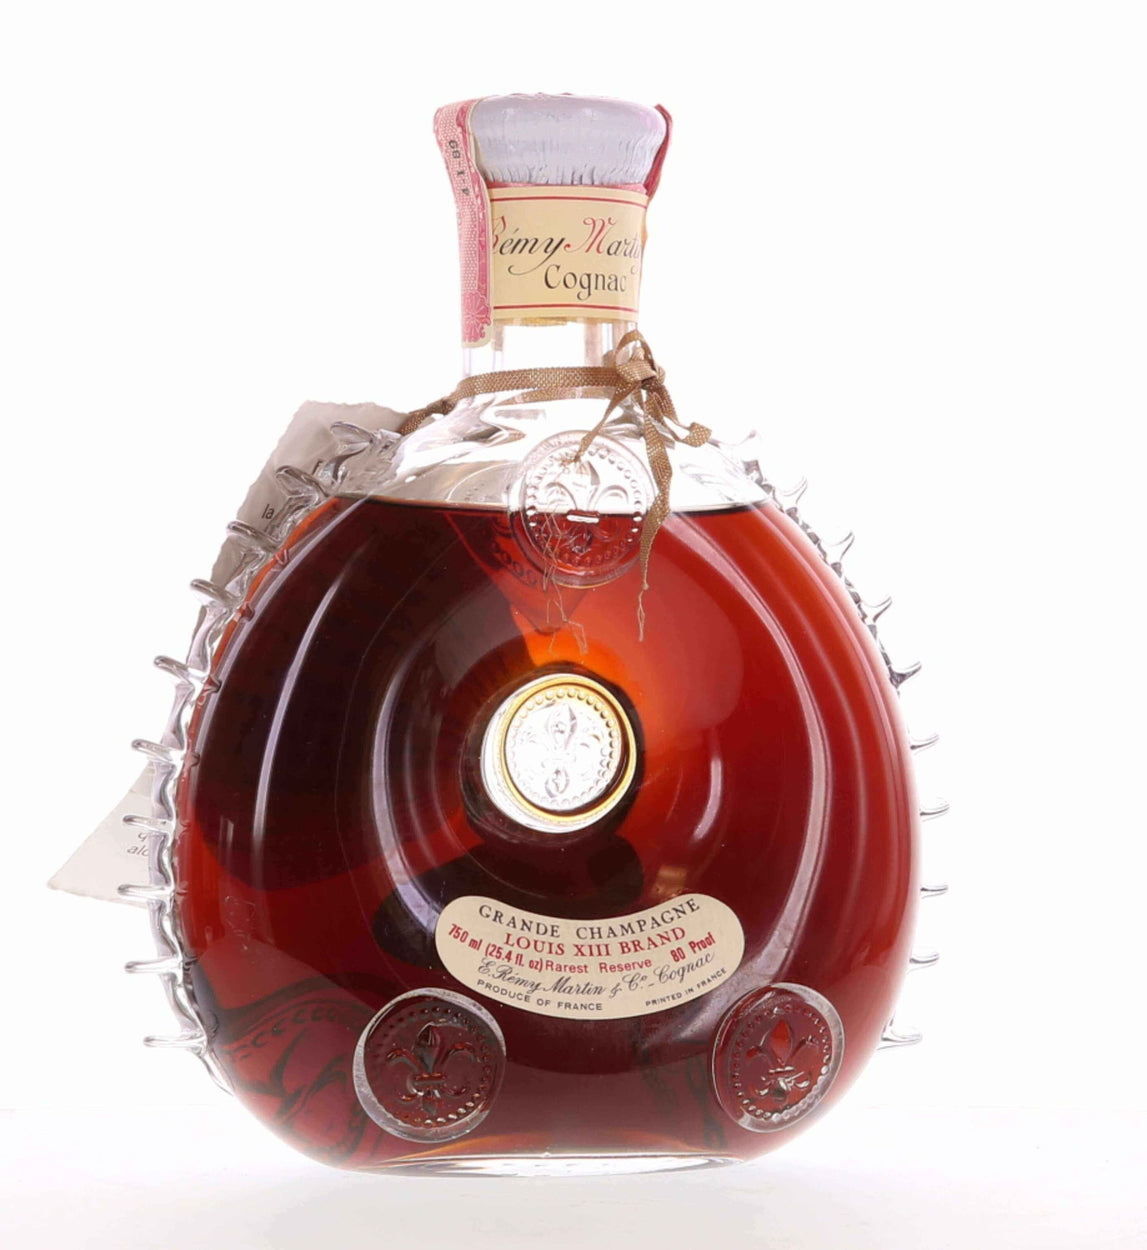 Louis XIII Cognac Glossy Red Box 1980s-1990s